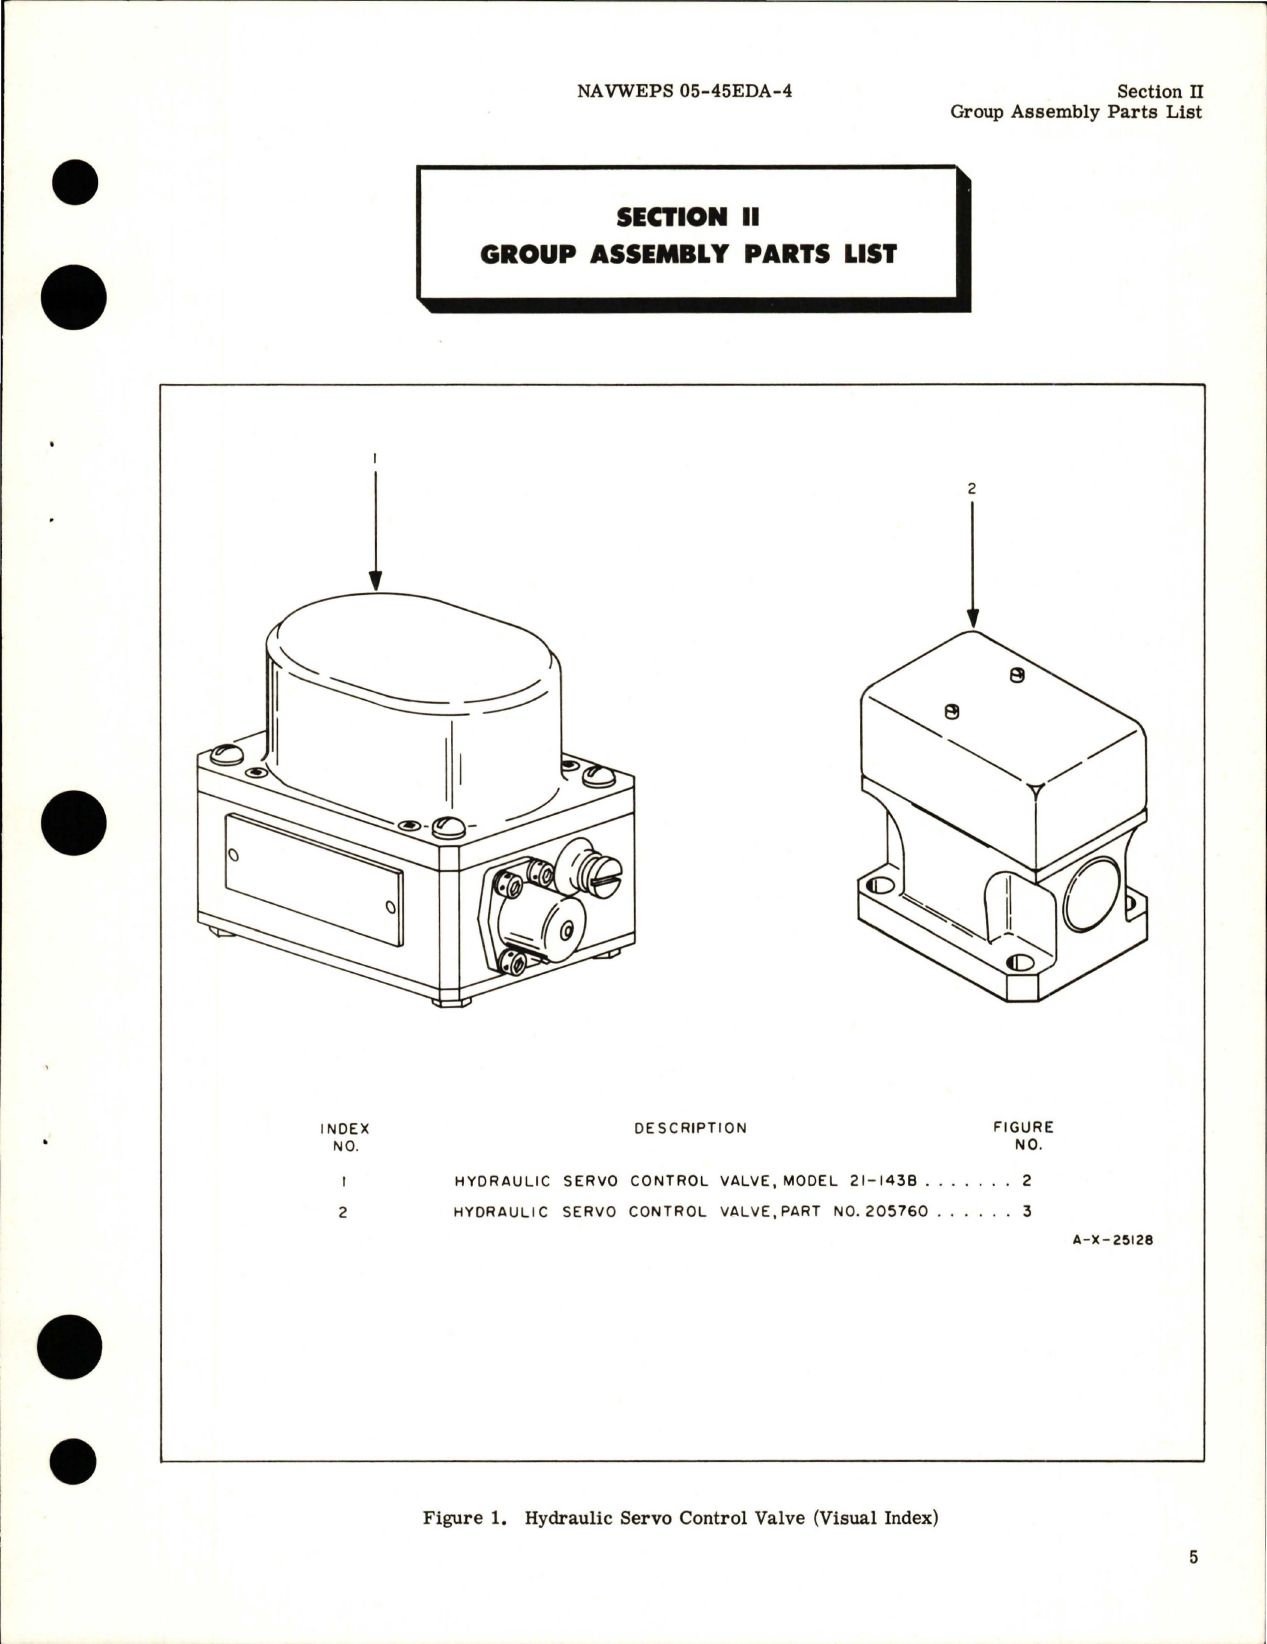 Sample page 7 from AirCorps Library document: Illustrated Parts Breakdown for Hydraulic Servo Control Valve - Part 1300563-1